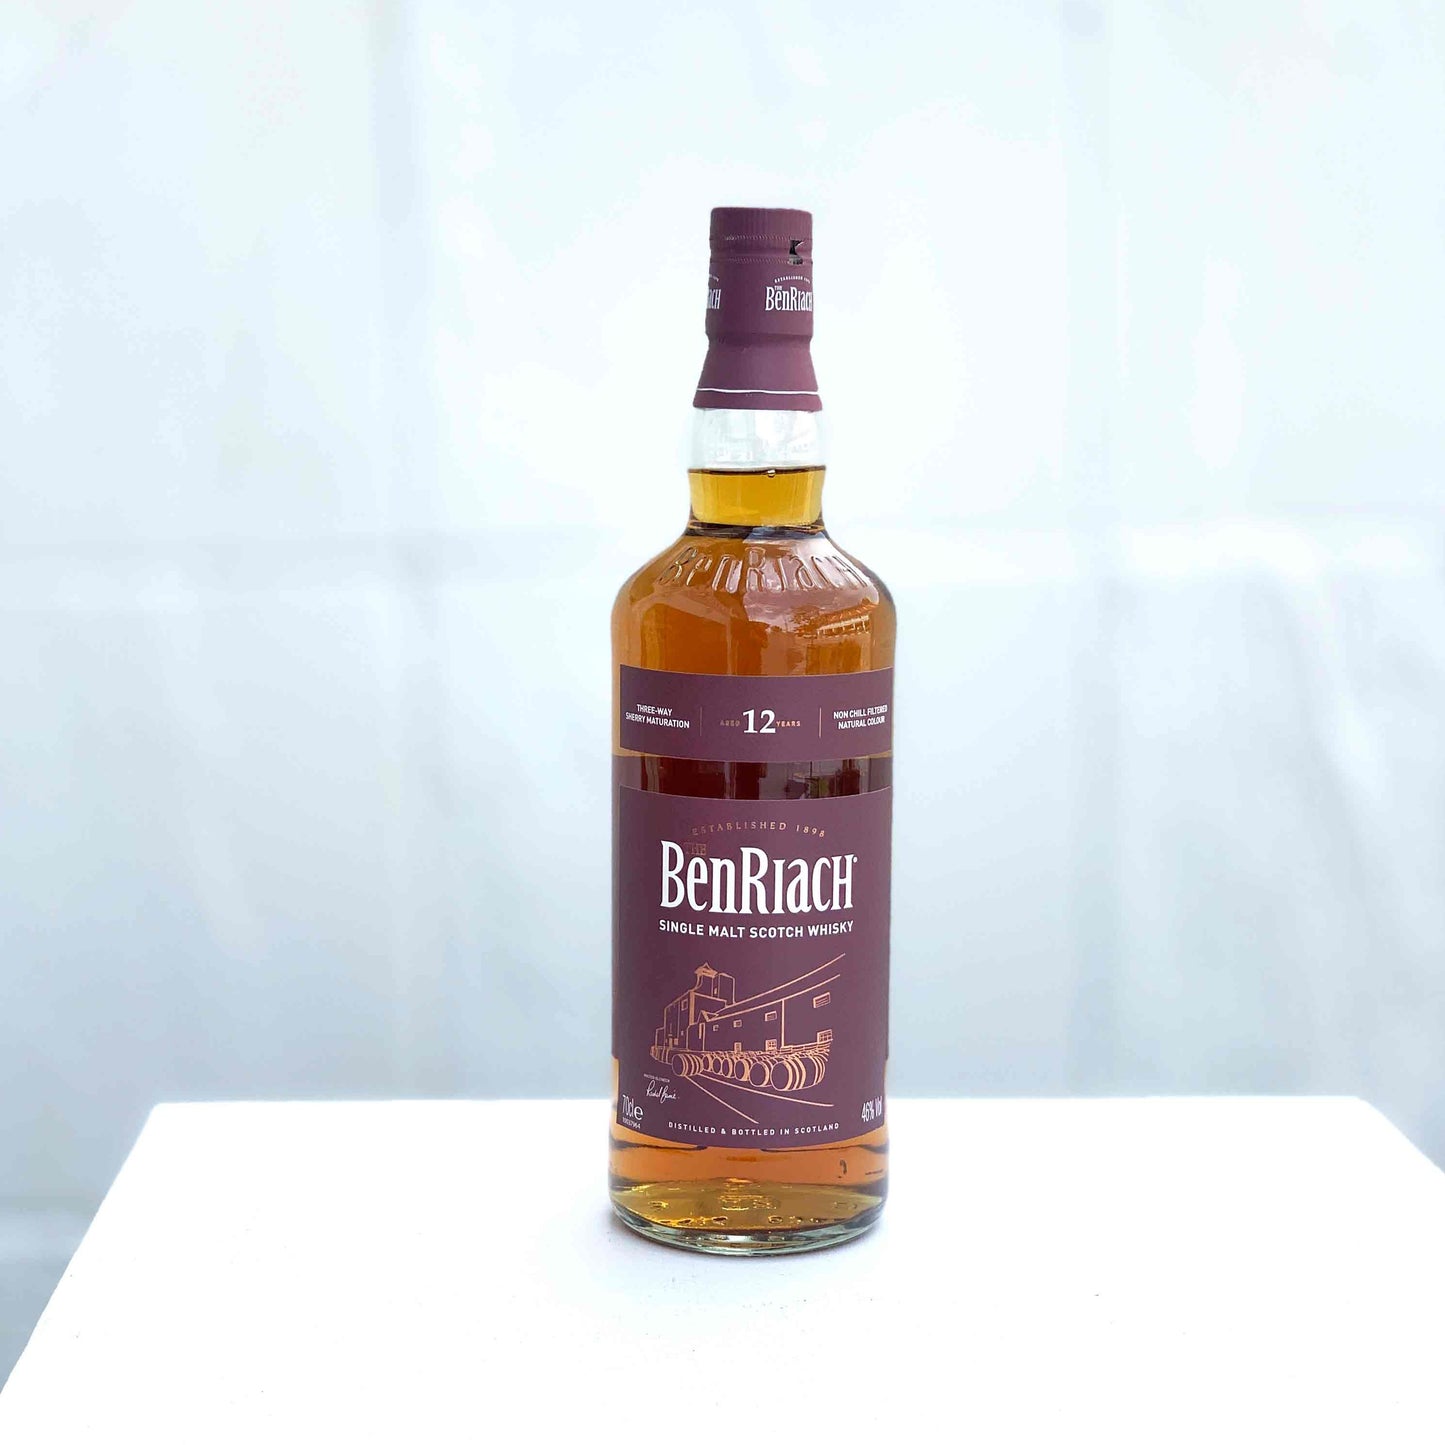 BenRiach Sherry Wood Aged 12 Years